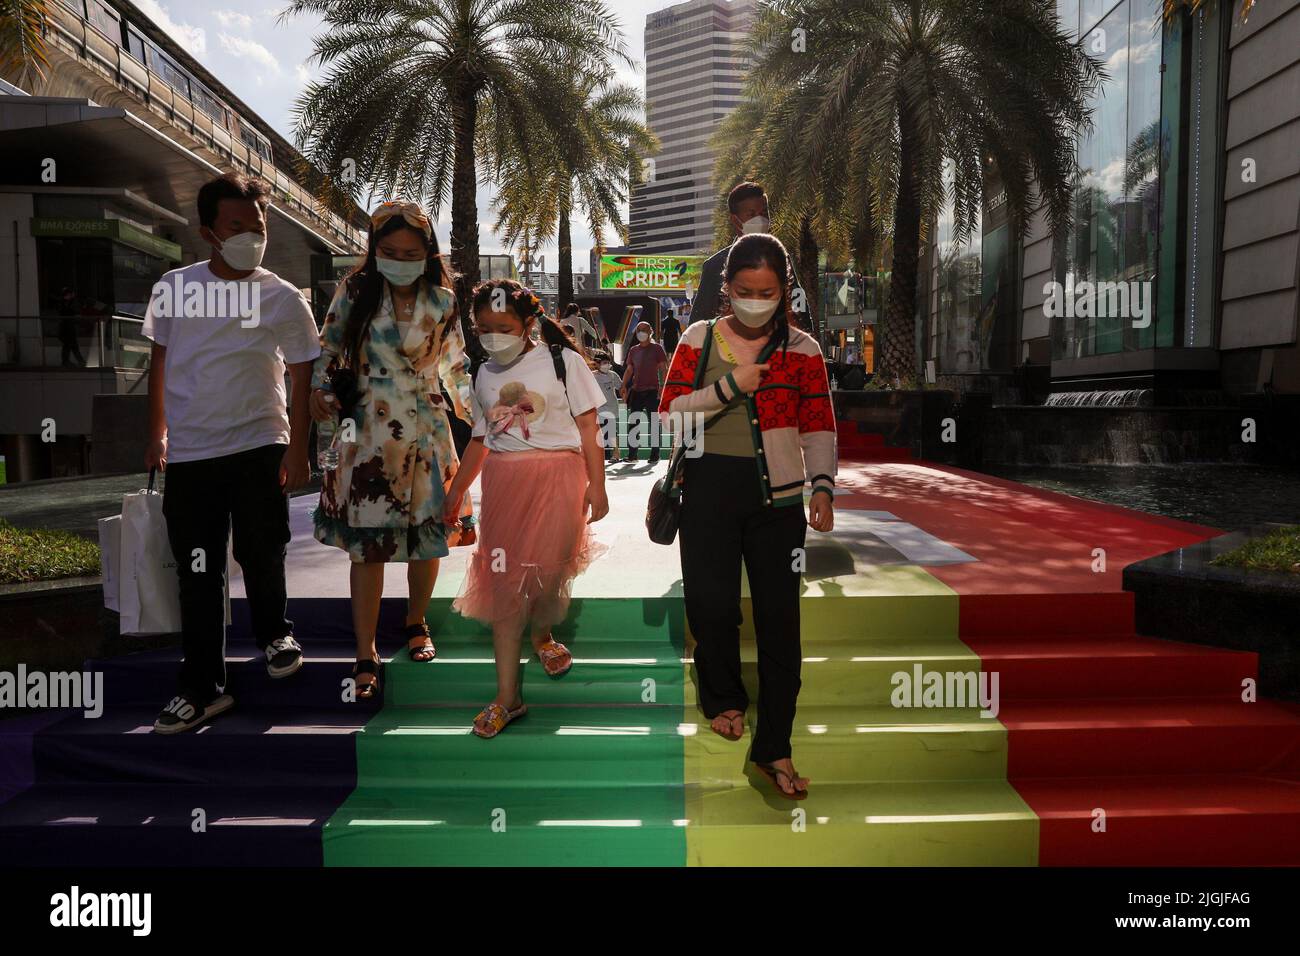 Pedestrians walk on a rainbow runway in front of Siam Center in Bangkok. Lawmakers in Thailand gave initial approval to legalizing same-sex unions, a step closer towards becoming the second territory in Asia to legalize same-gender marriages. Thailand. Stock Photo